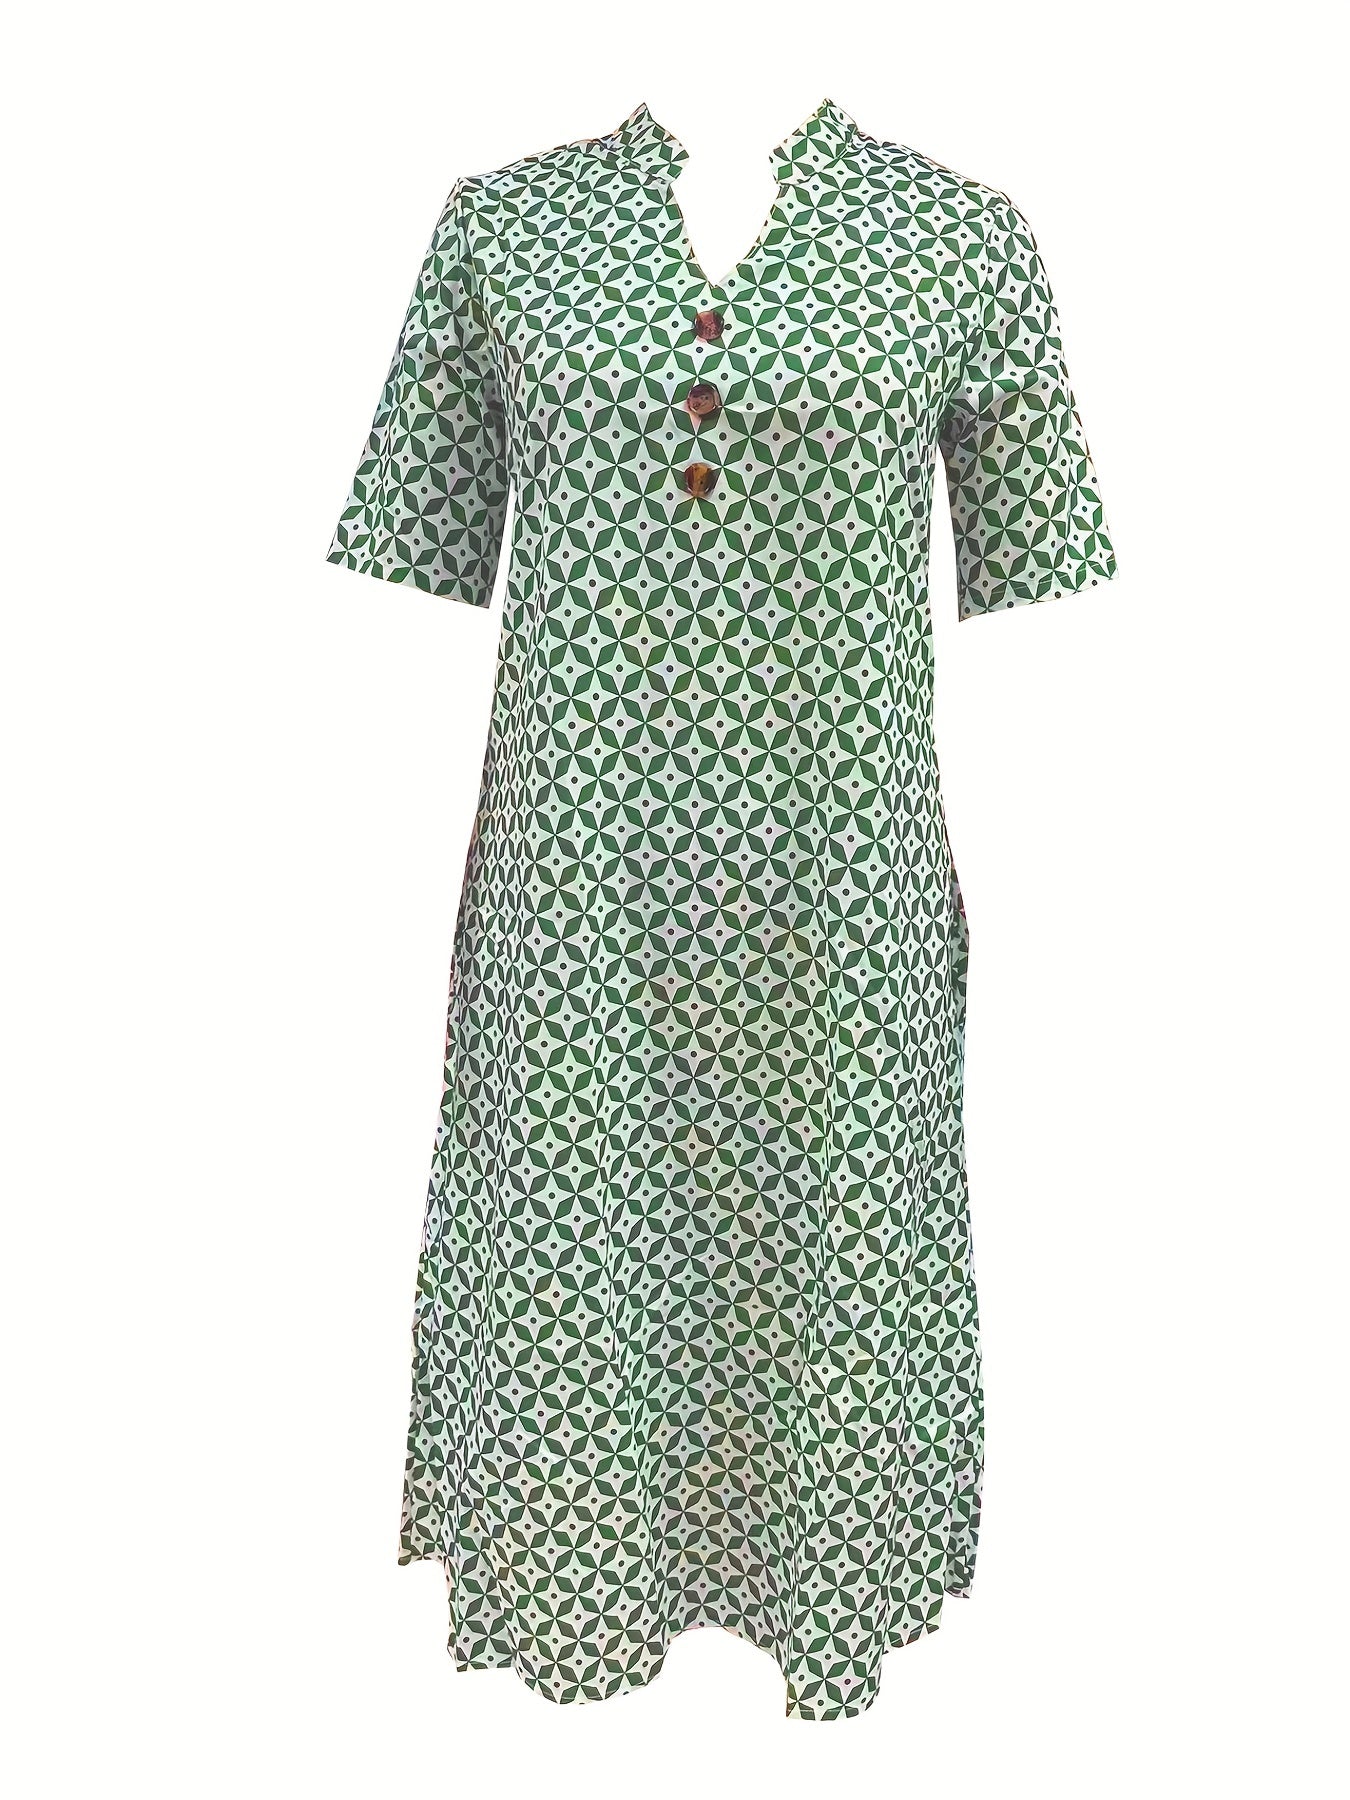 「lovevop」Allover Print Button Front Dress, Casual Short Sleeve Dress For Spring & Summer, Women's Clothing